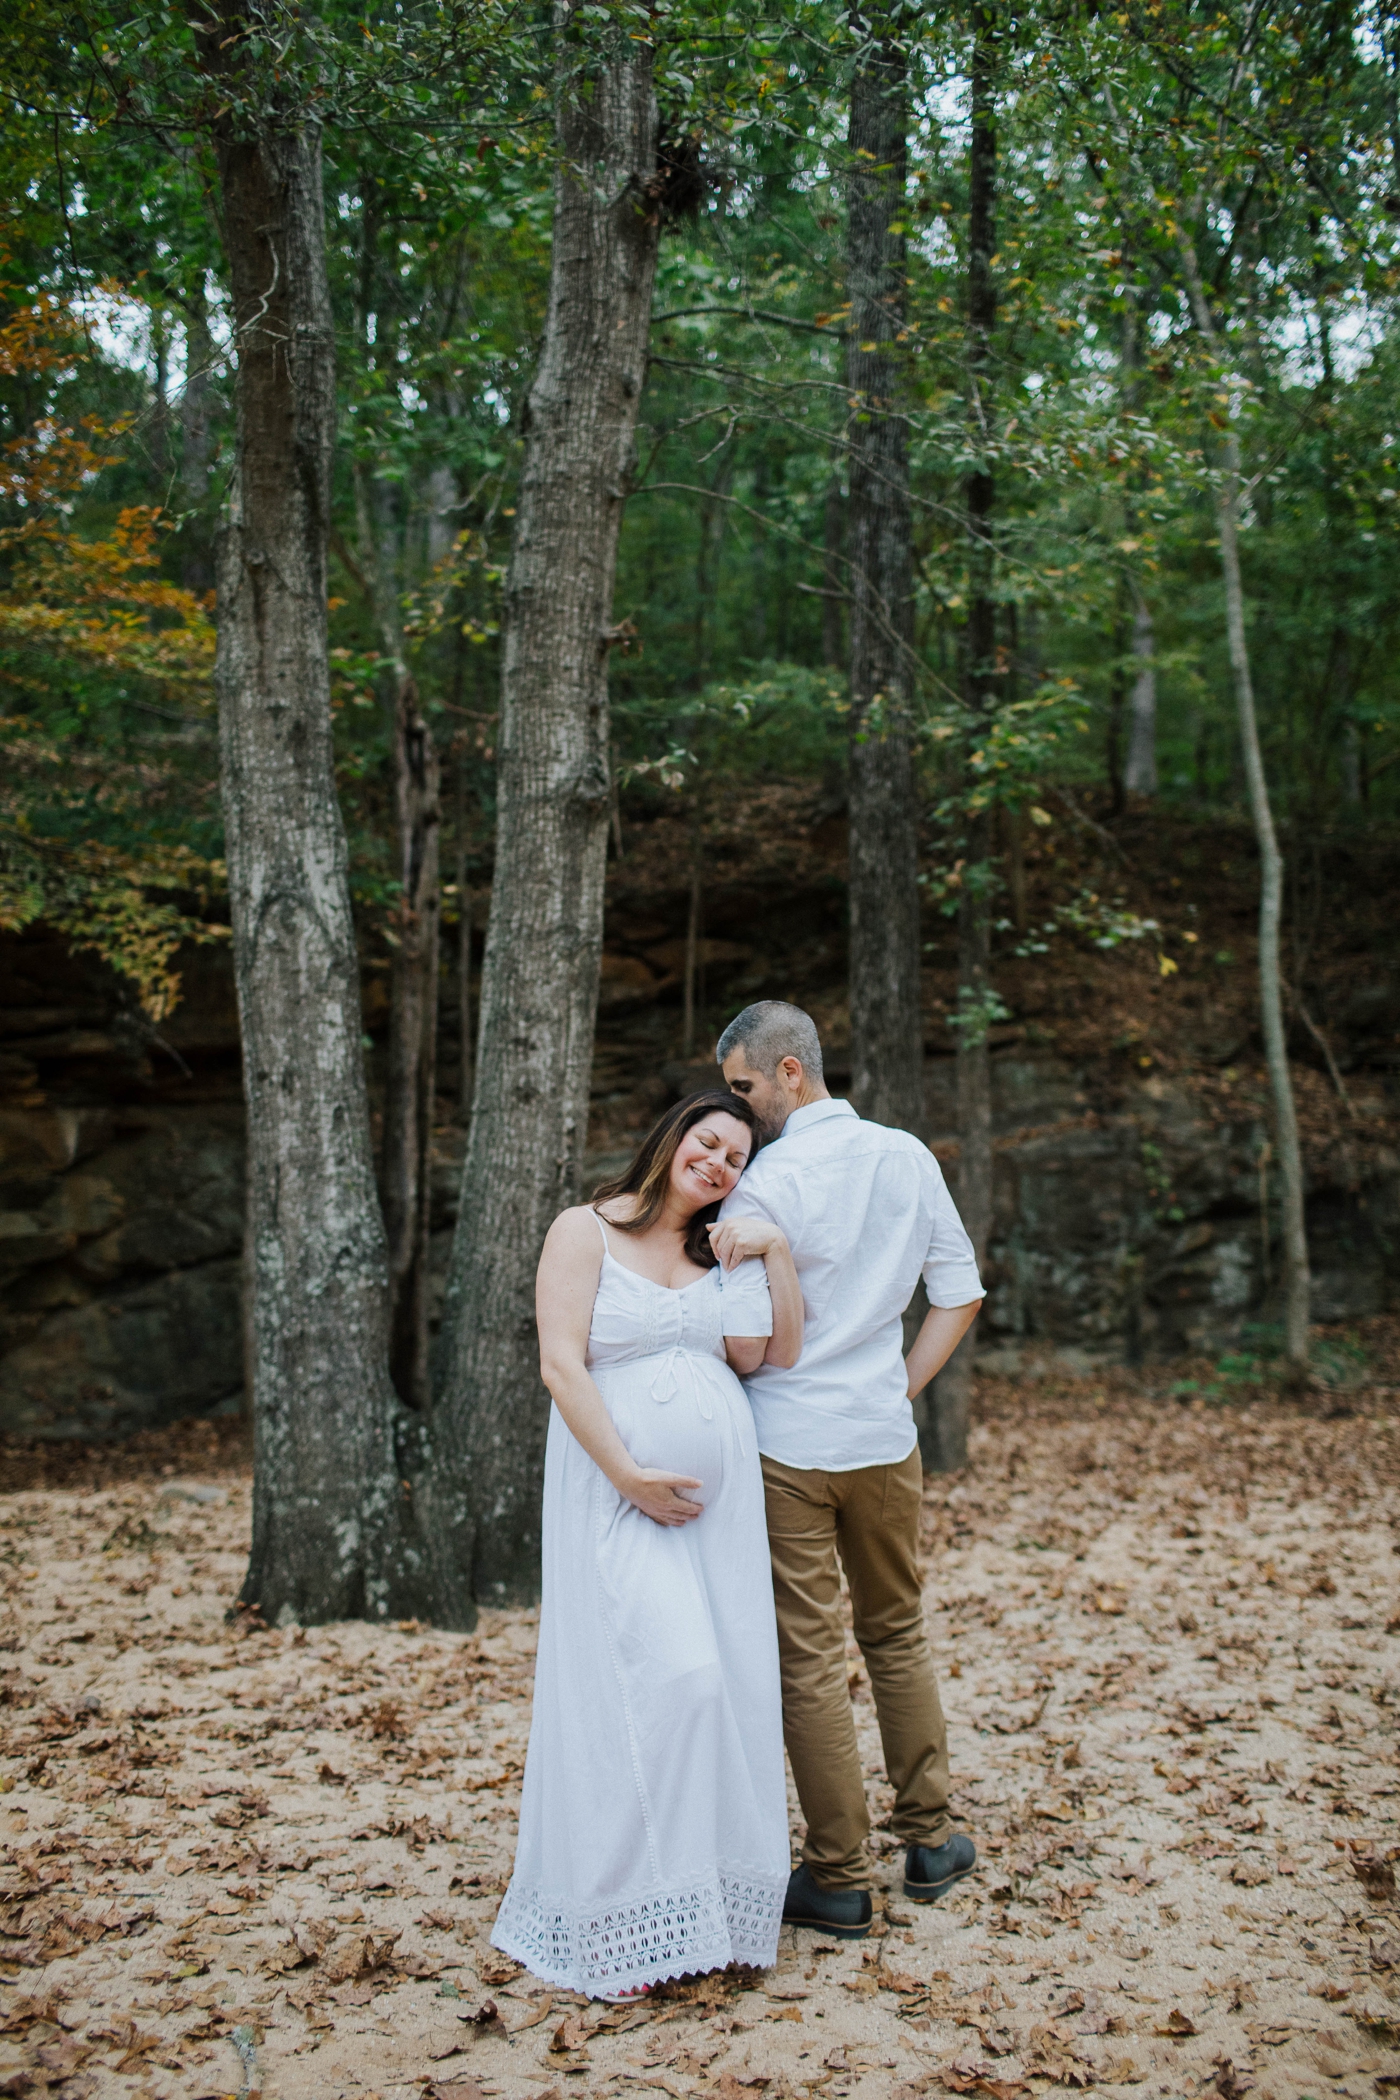 Alison & Tim’s Maternity Session in Athens, Georgia at Ben Burton Park | Izzy and Co.